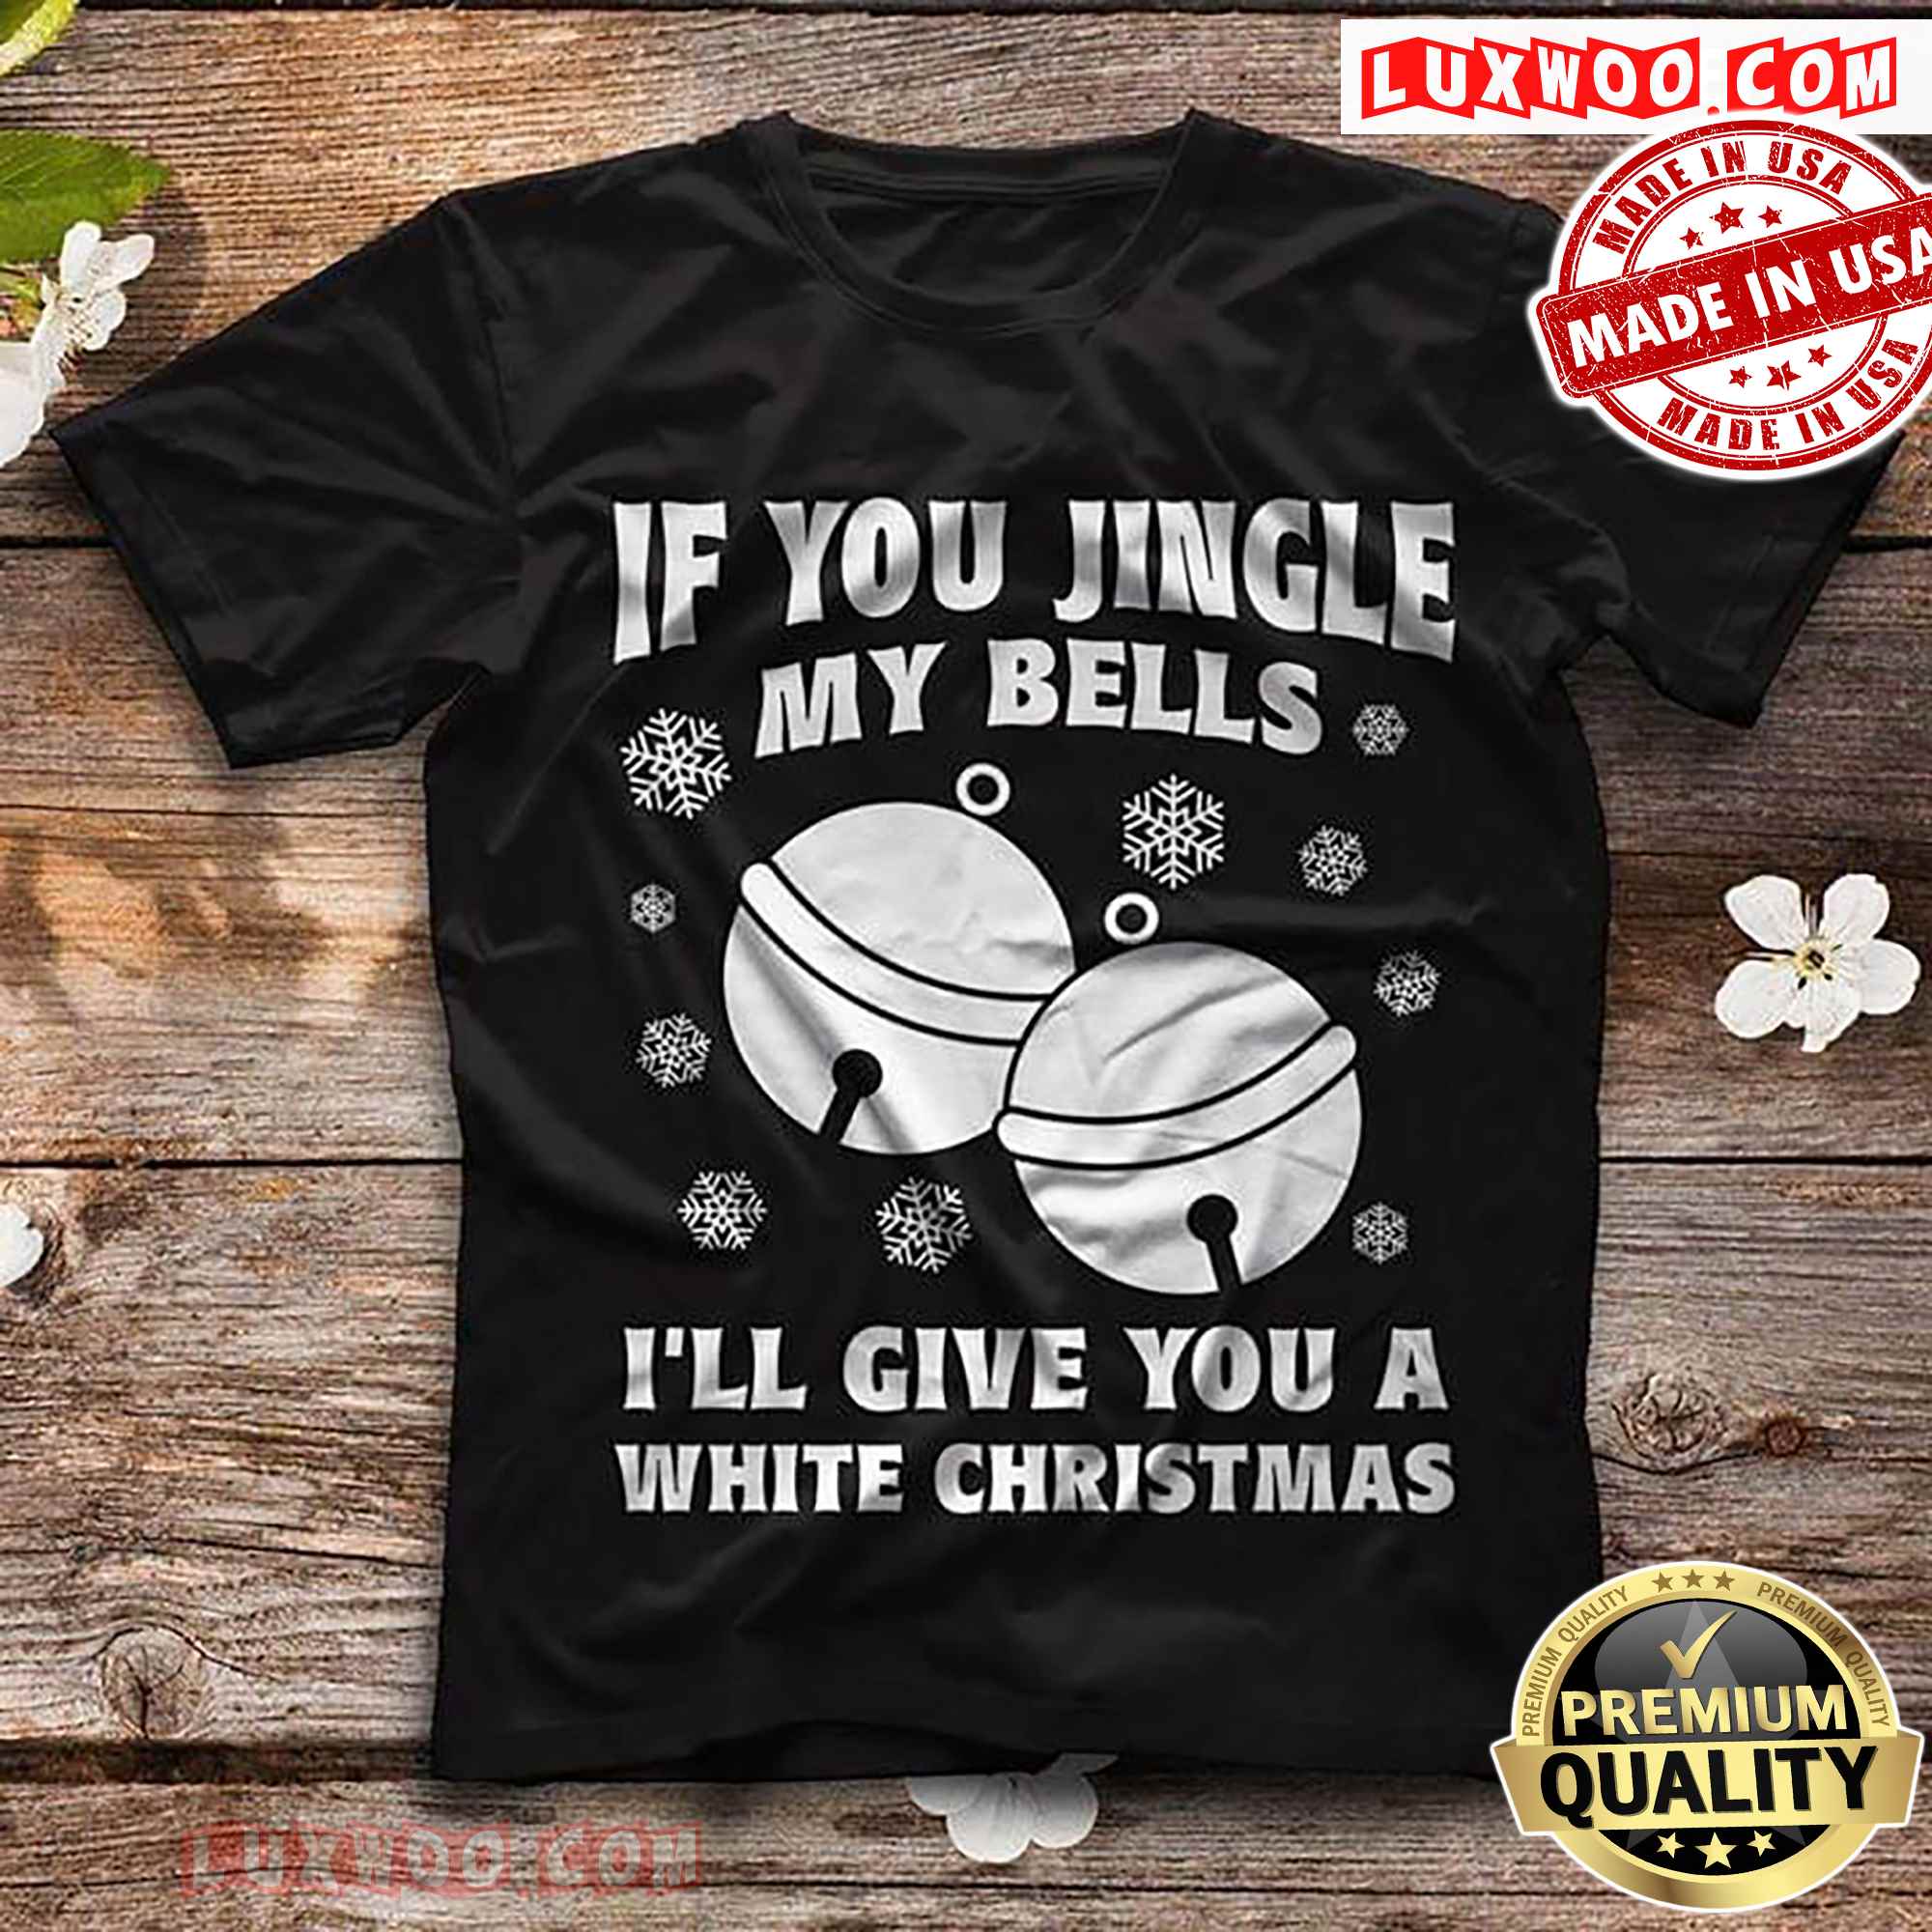 If You Jingle My Bell Ill Give You A White Christmas - Luxwoo.com